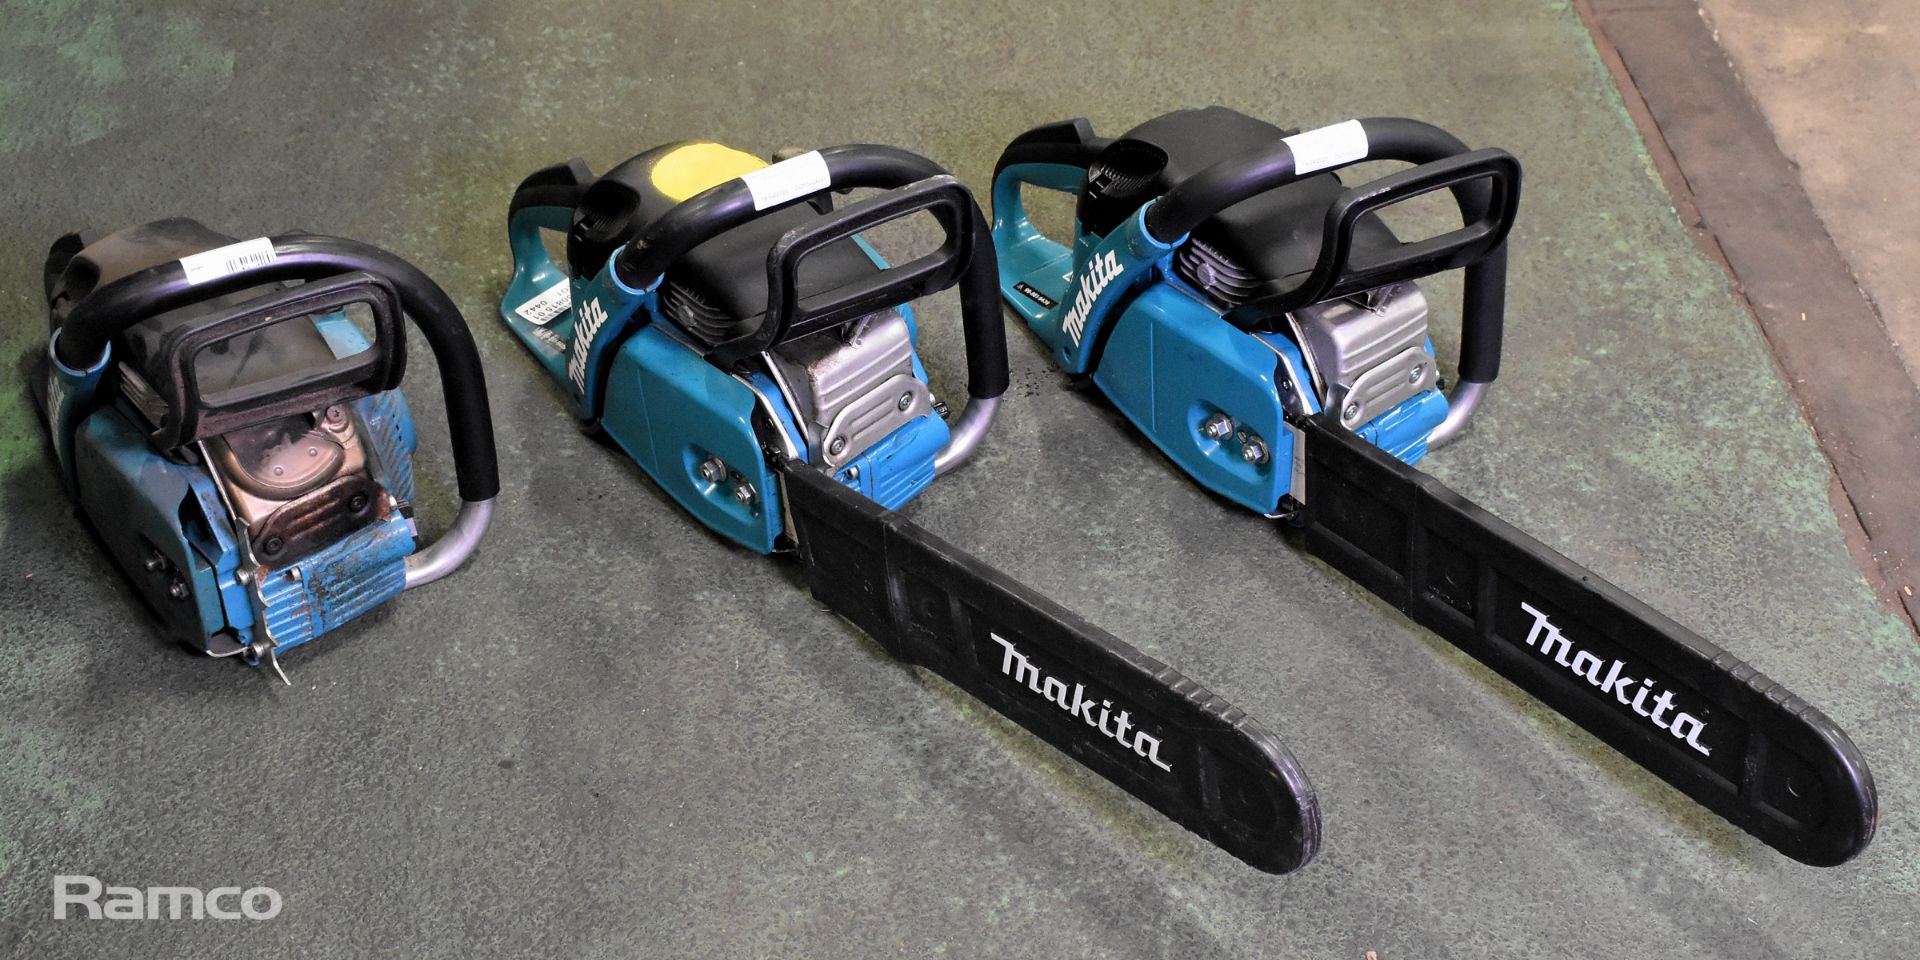 2x Makita DCS5030 50cc petrol chainsaws with guide and chain - AS SPARES & REPAIRS, Makita EA5000P